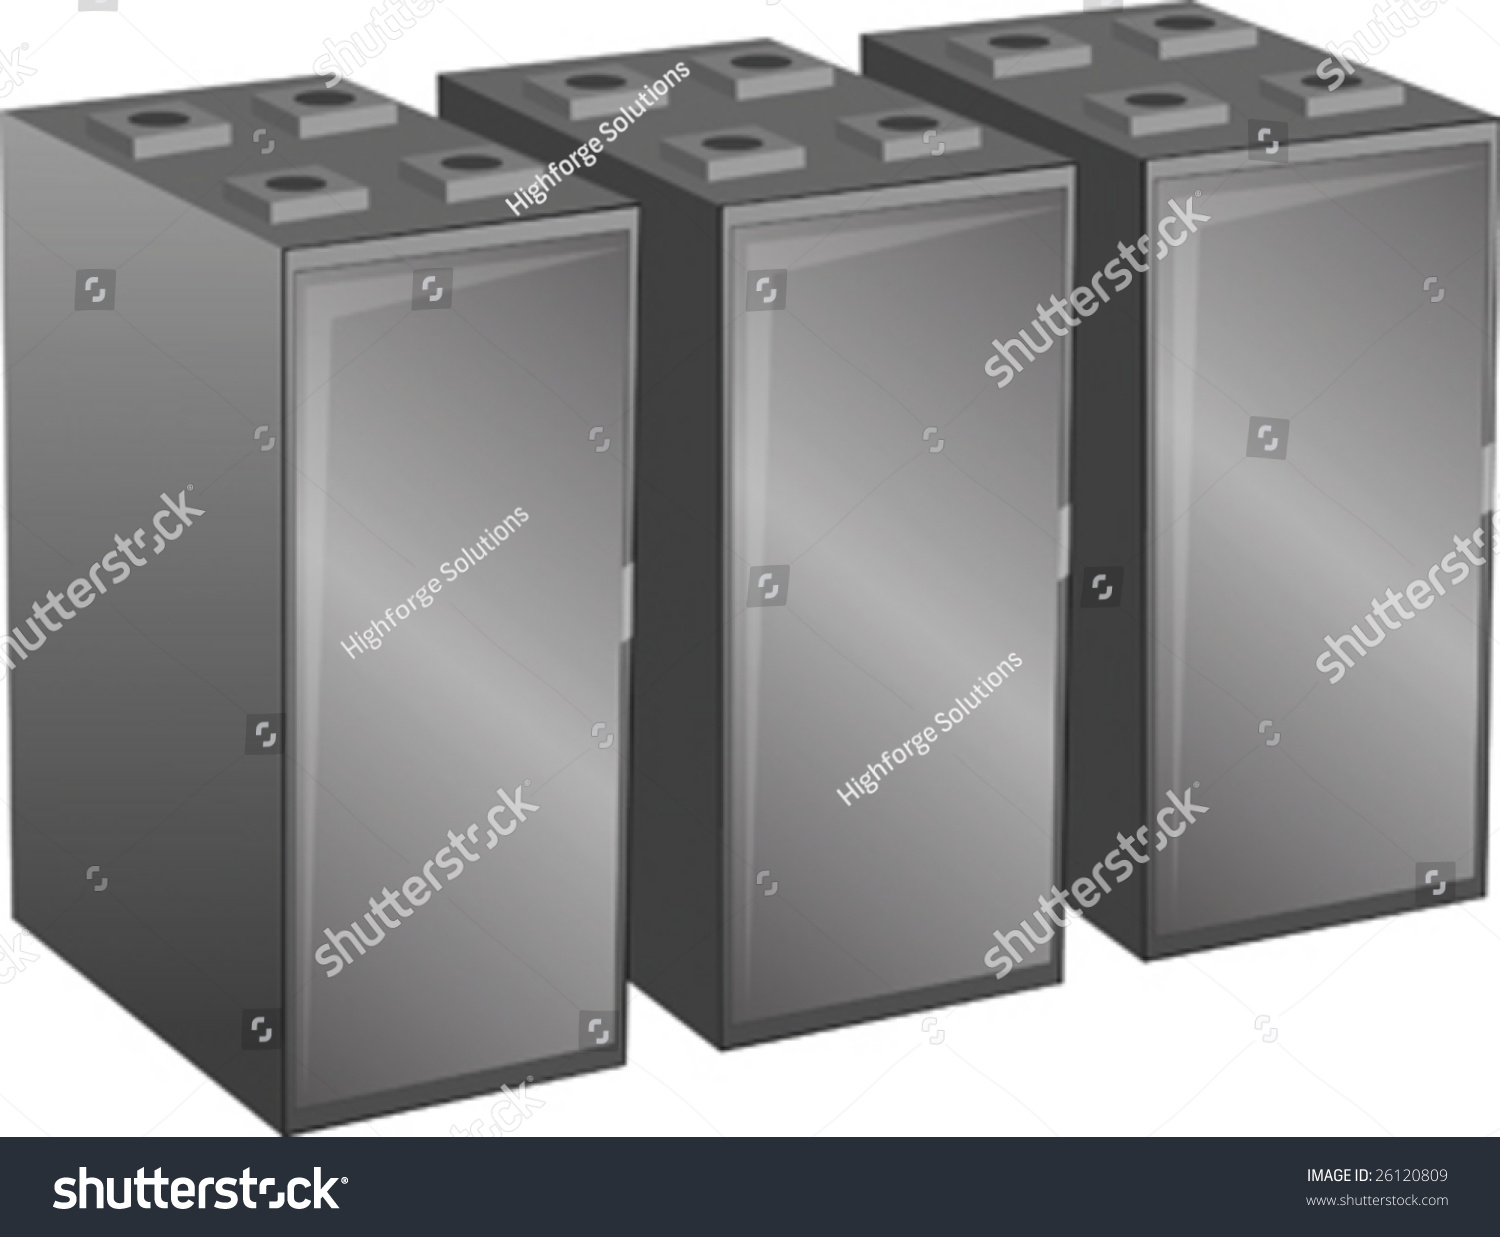 SVG of Abstract vector illustration Row of server cabinets as found in a data center svg